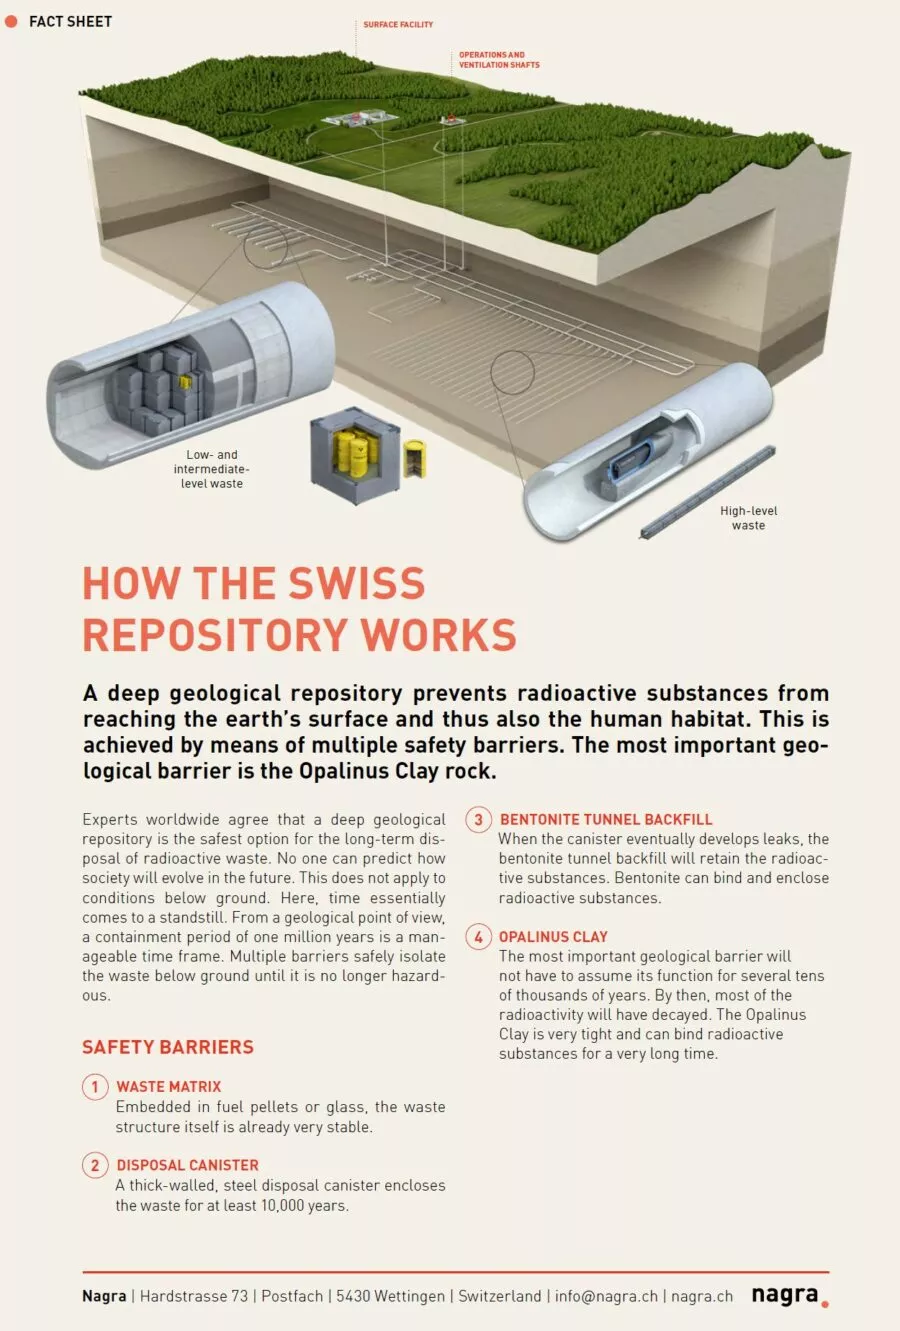 Nagra factsheet how the swiss repository works